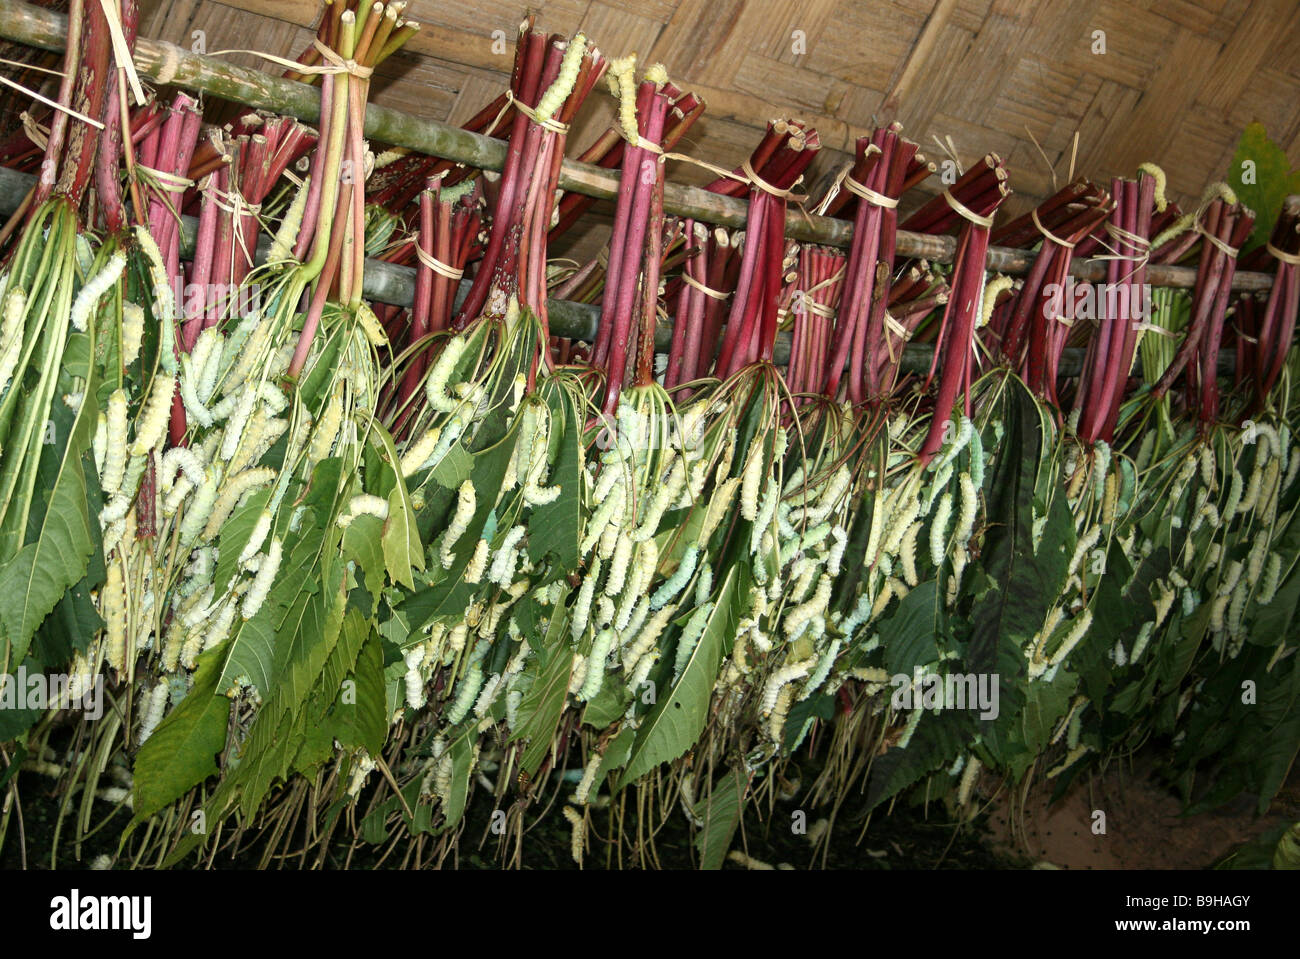 Eri Silkworms Philosamia ricini feeding on Castor Oil Plant Leaves Hung Up in a Line Stock Photo